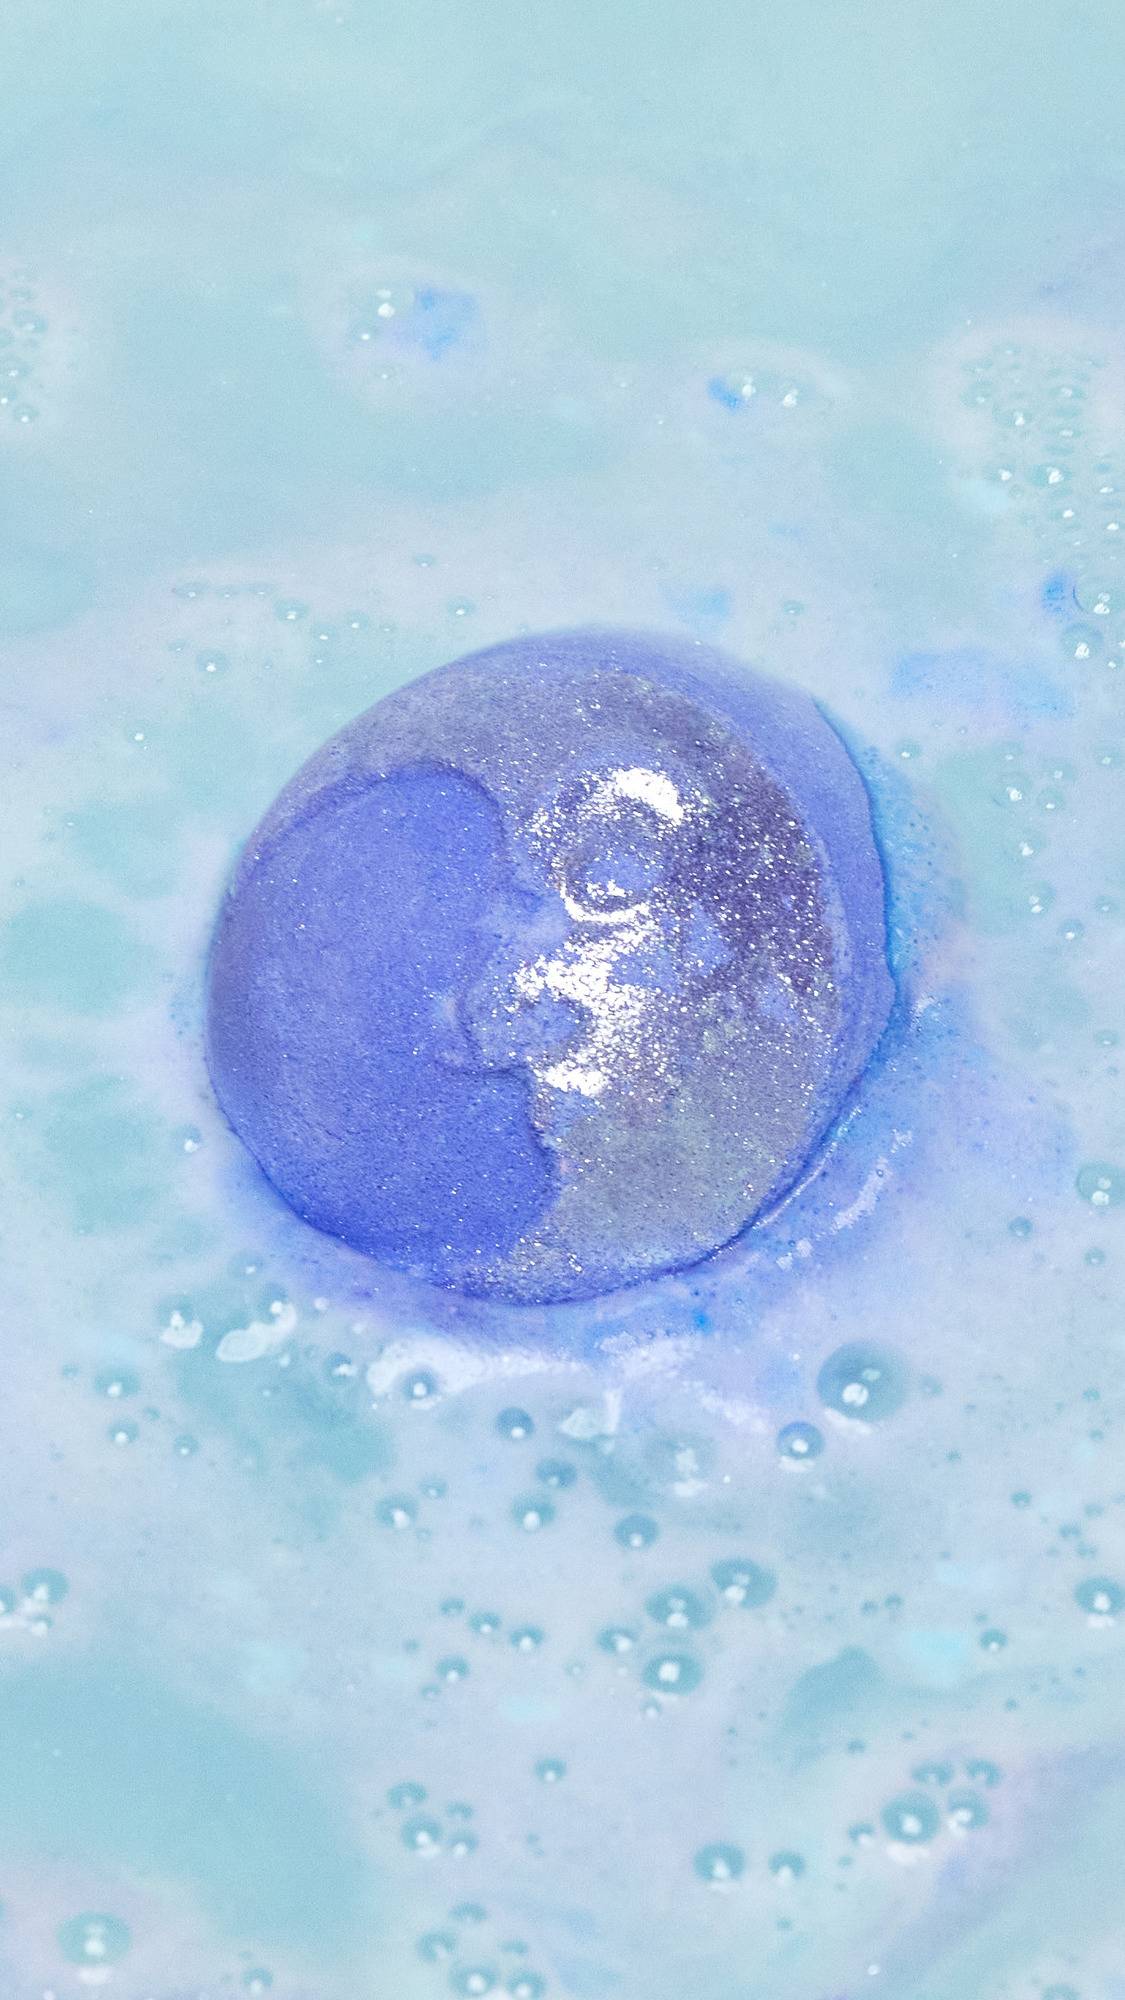 The Brother Moon bath bomb has just been placed into the bath water as it starts to give off subtle purple foam laced with silver sparkles. 